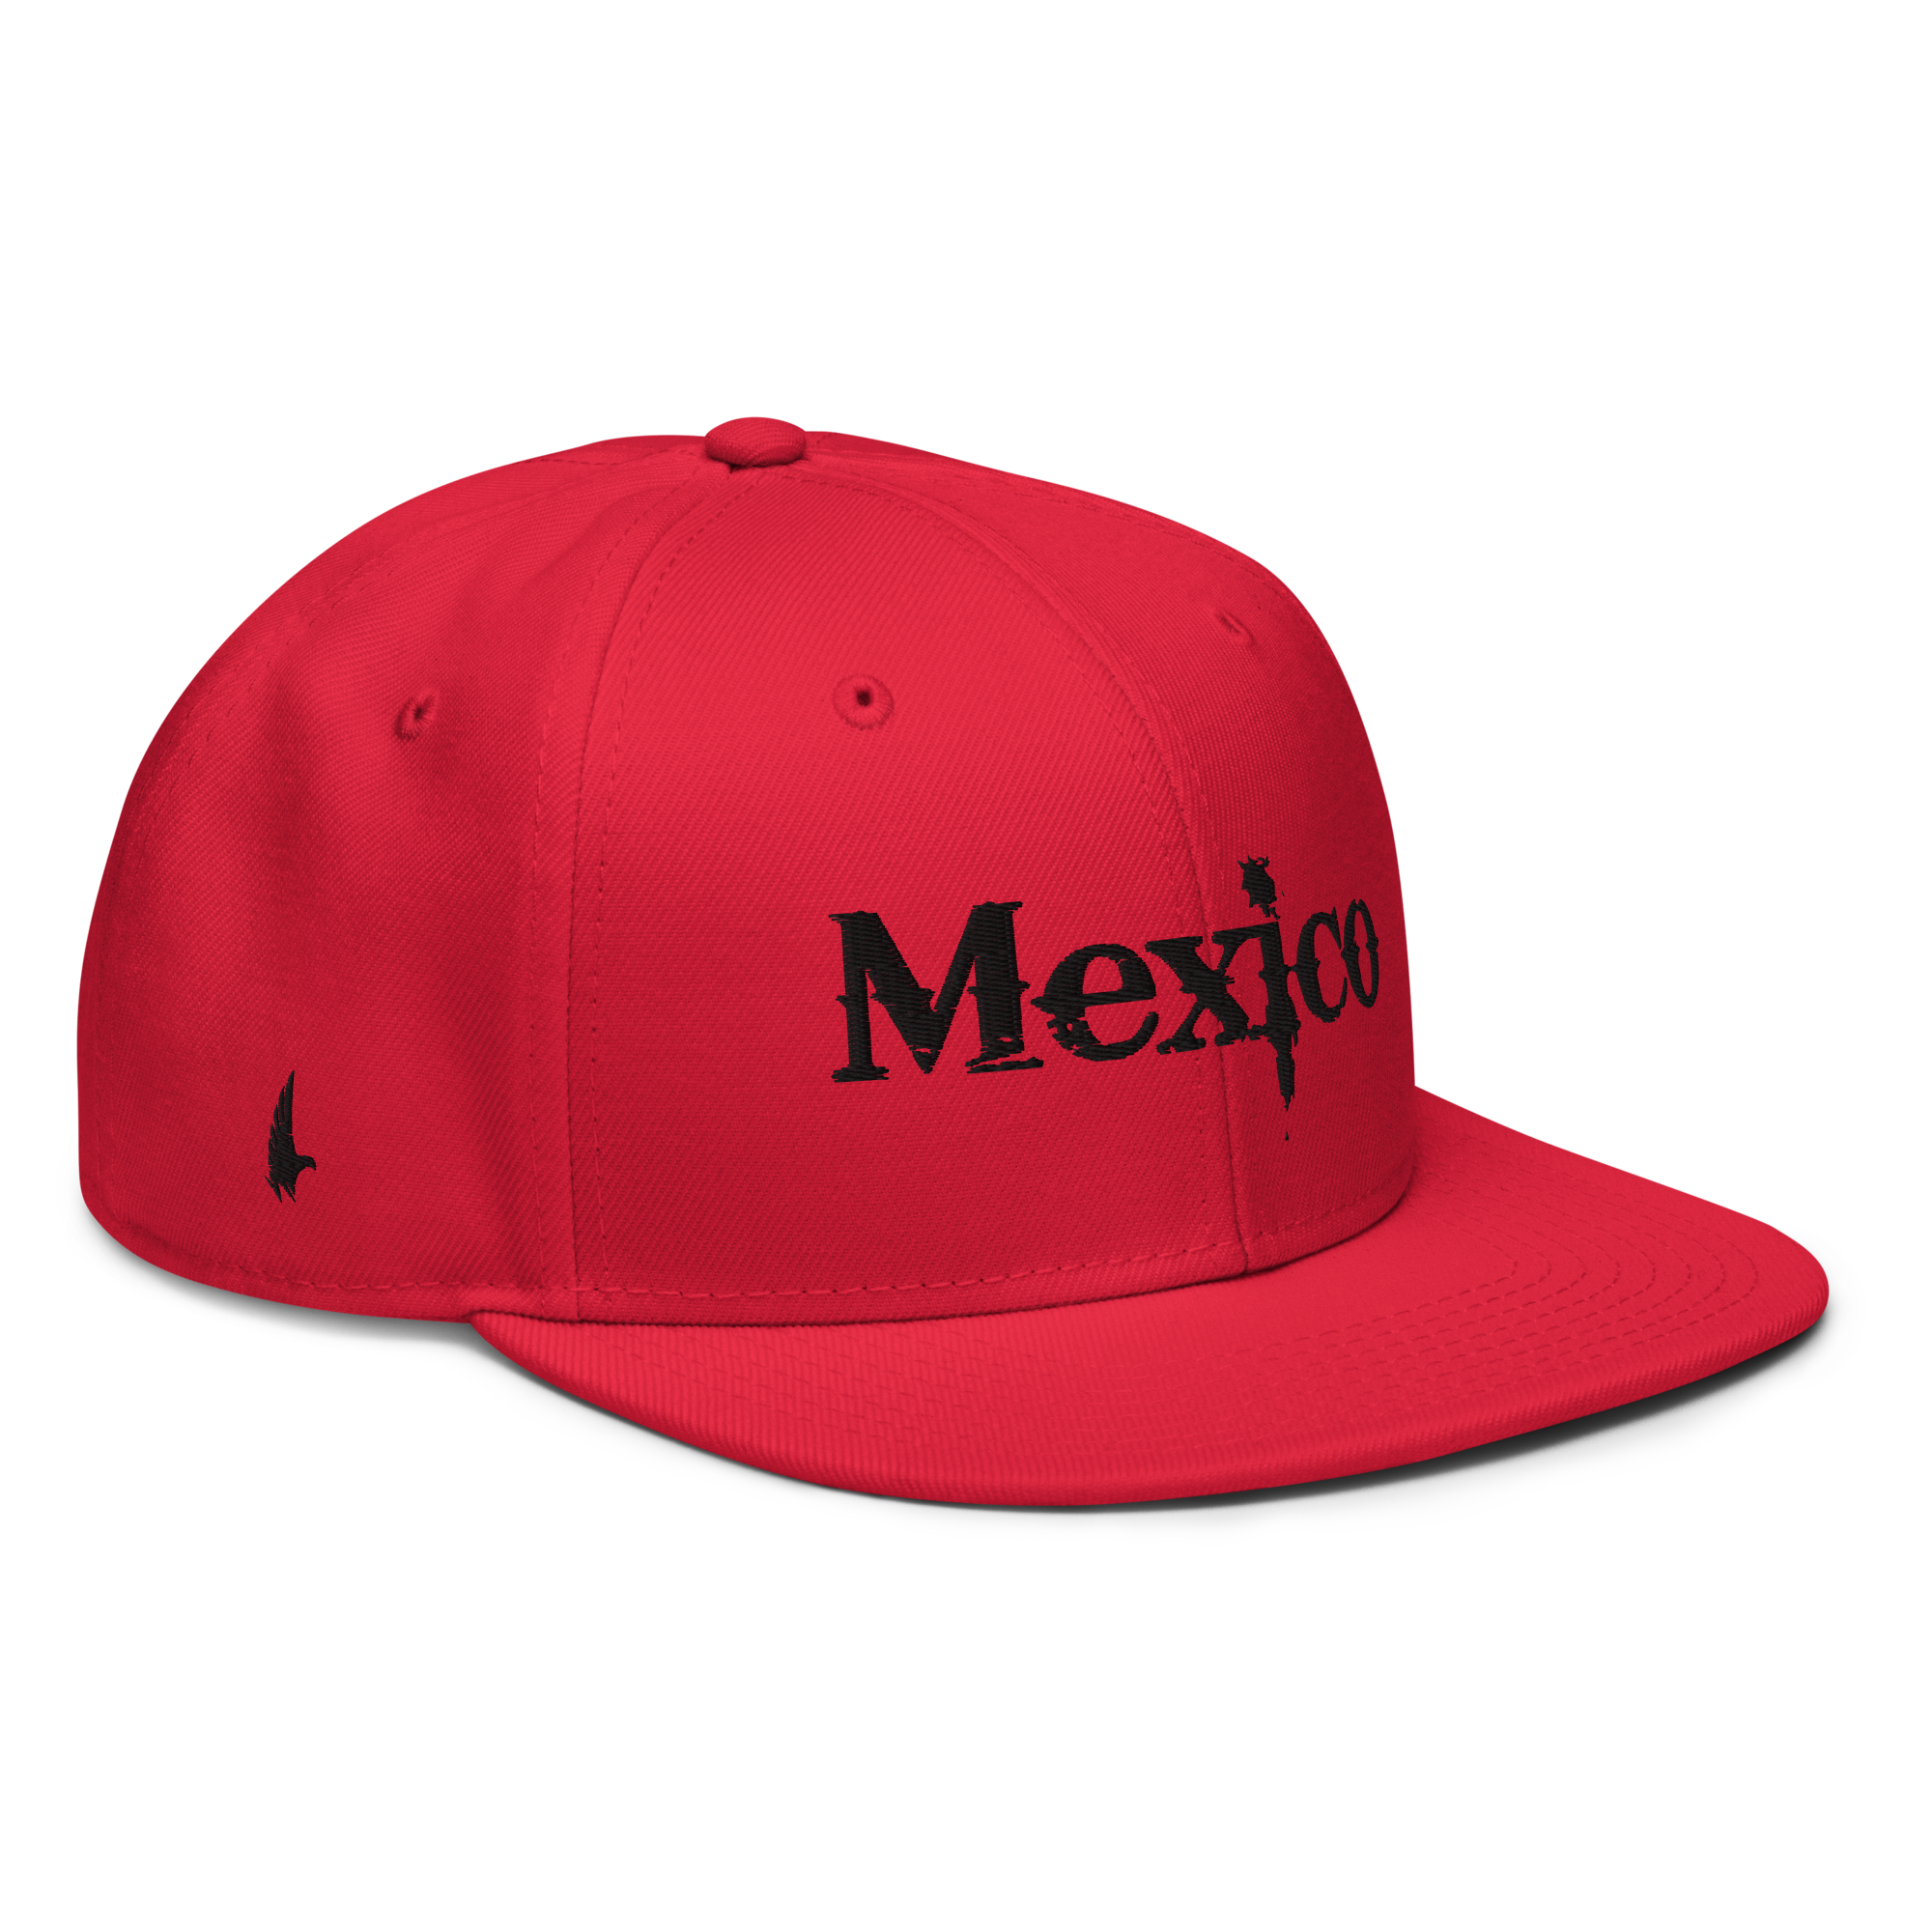 Mexico Snapback Hat - Red/Black OS - Loyalty Vibes